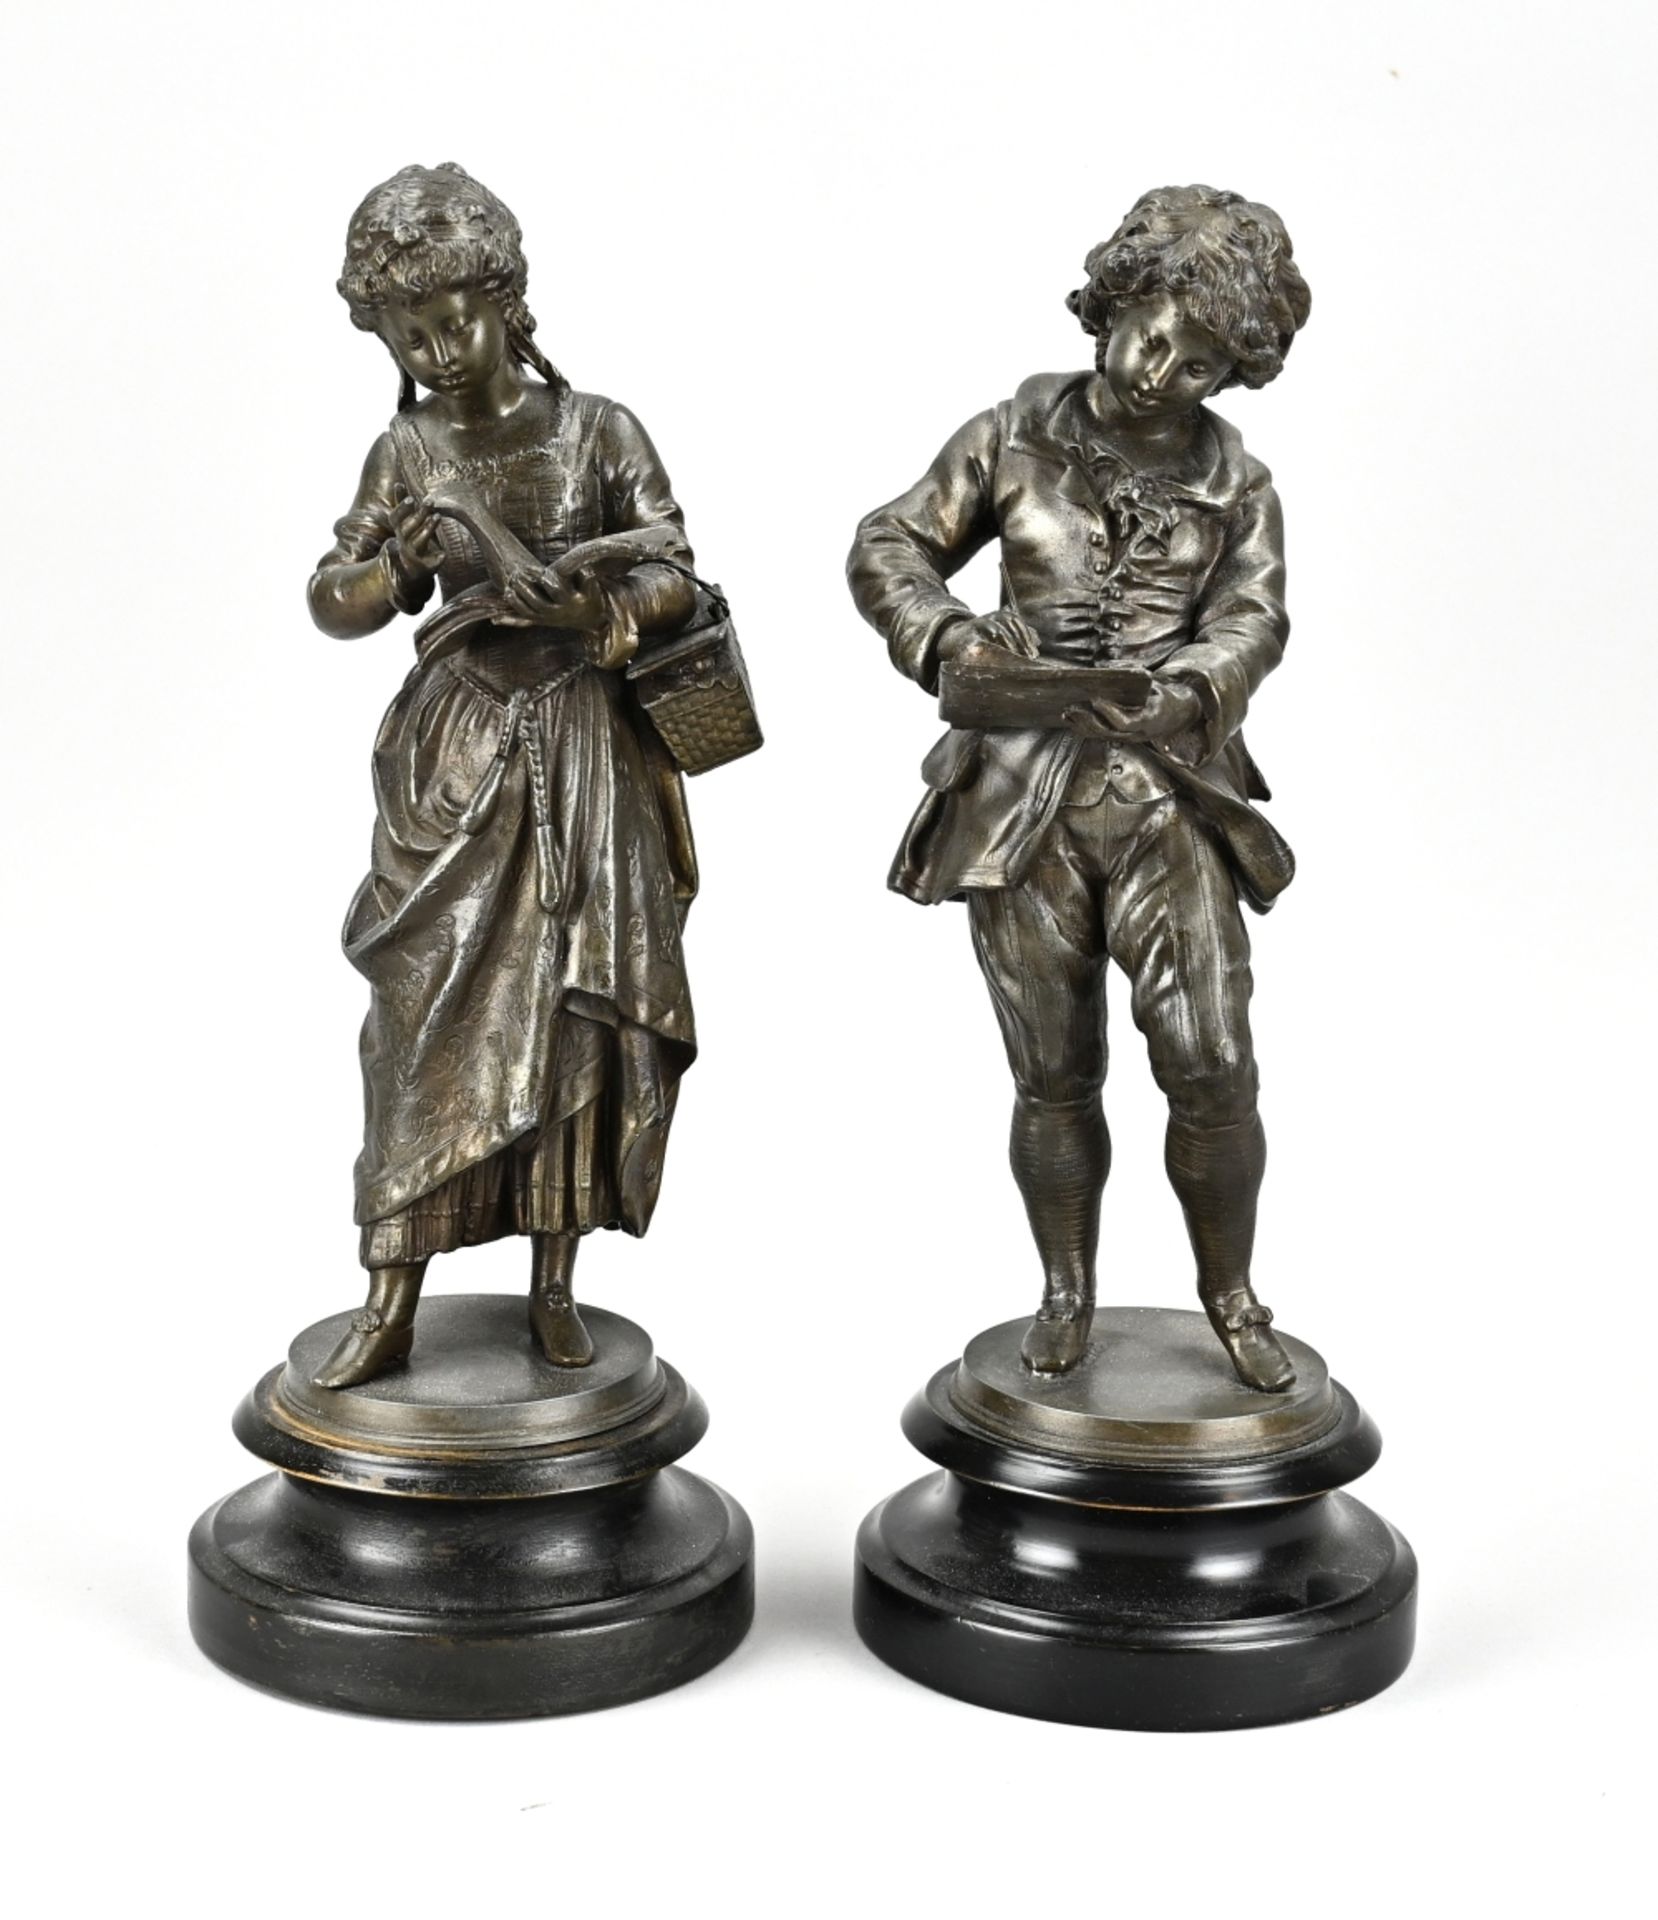 Two antique figures, 1900